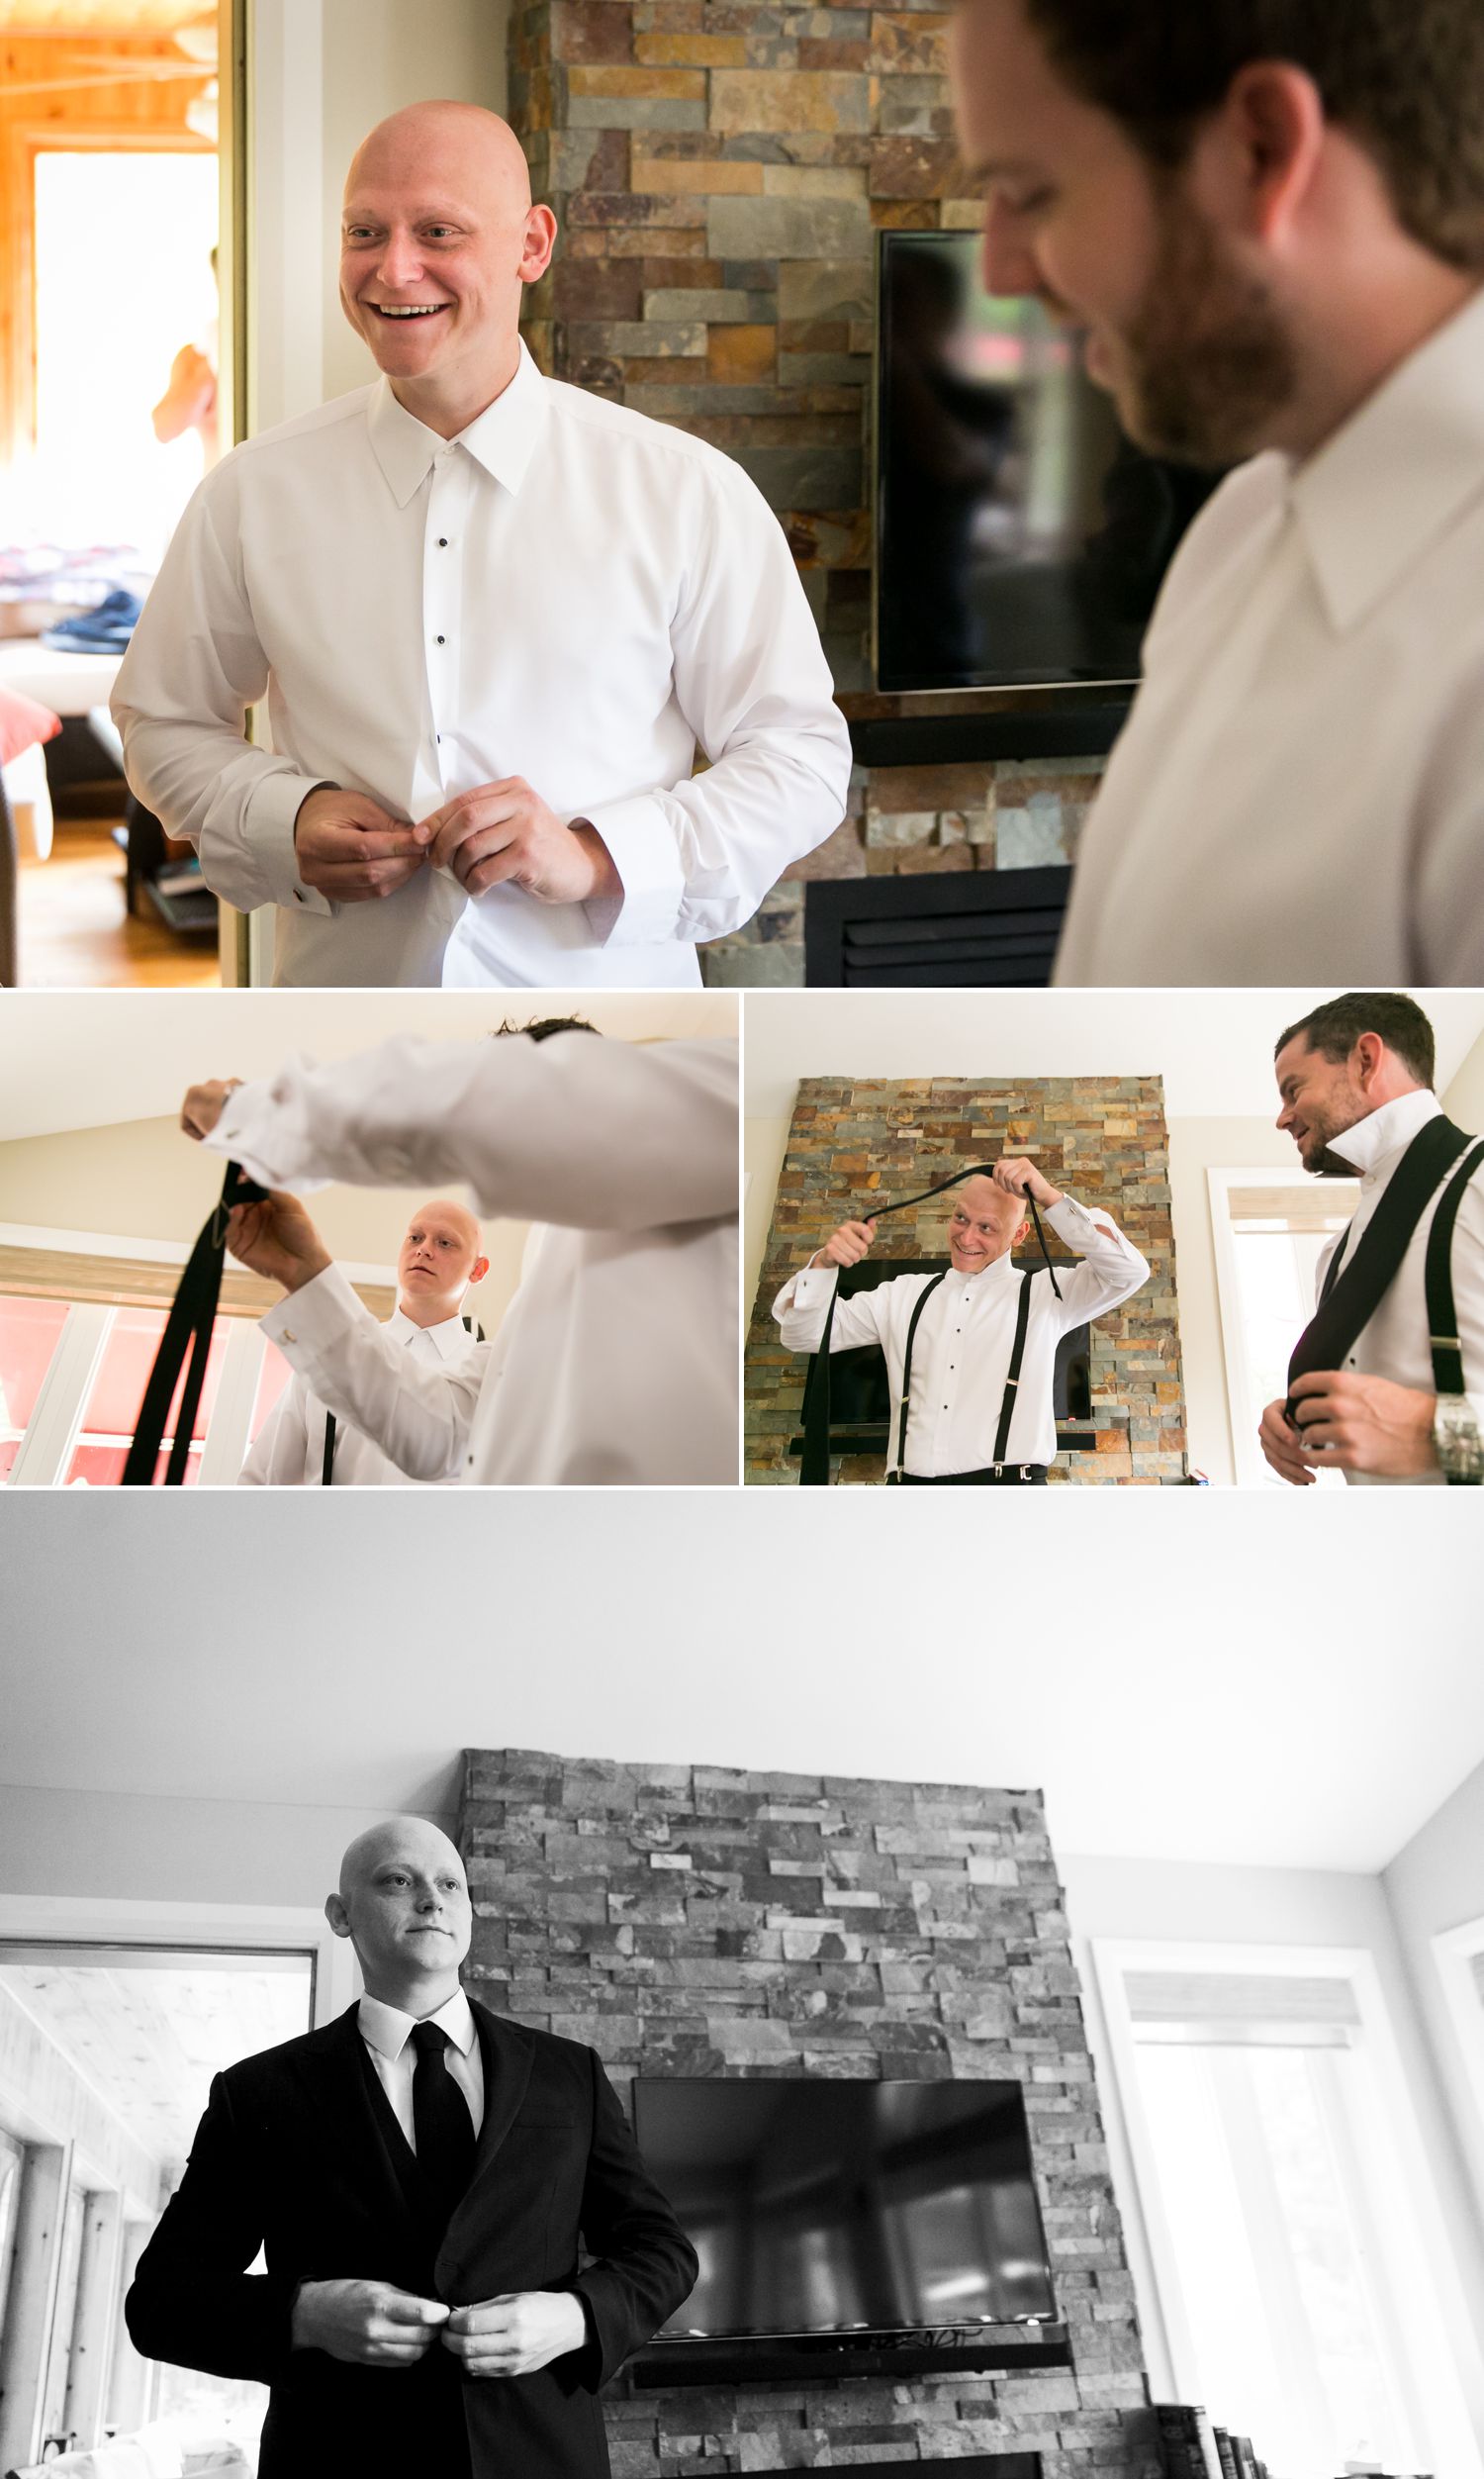 A photograph of the groom and groomsmen getting ready for the wedding